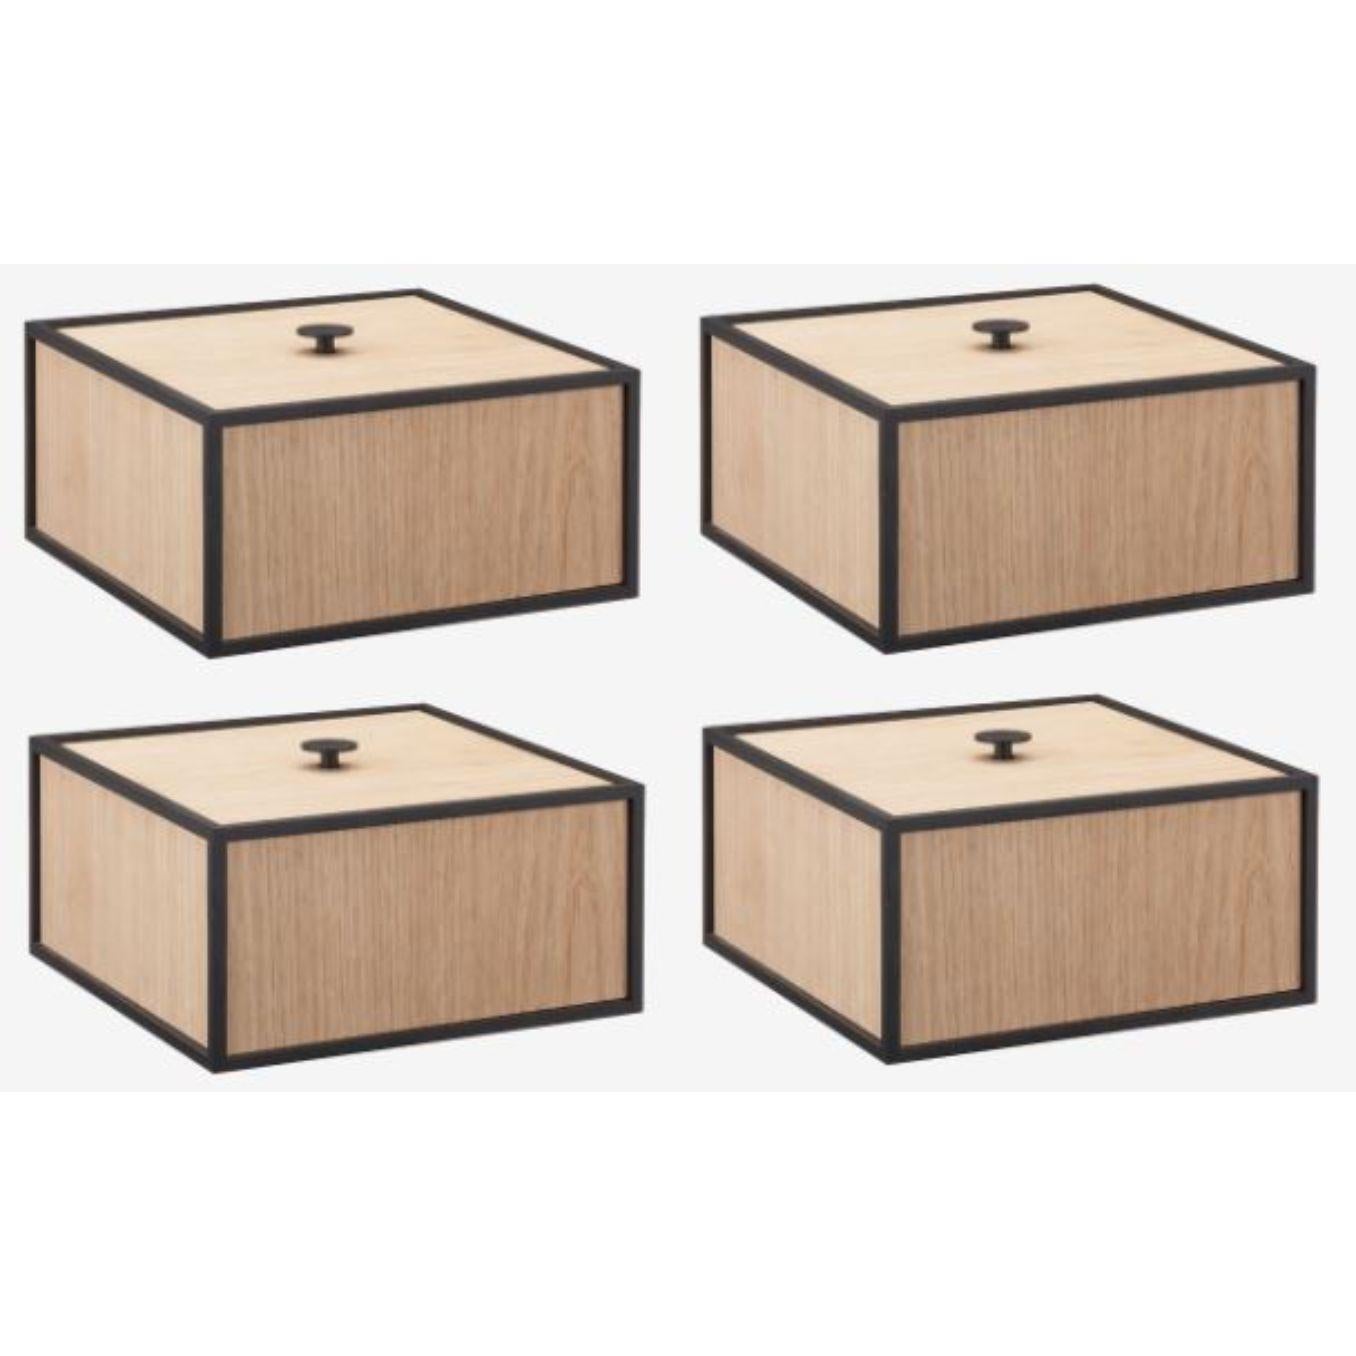 Set of 4 oak frame 20 box by Lassen
Dimensions: d 20 x w 20 x h 10 cm 
Materials: Melamin, Melamine, Metal, Veneer
Weight: 2.00 Kg

Frame box is a square box in a cubistic shape. The simple boxes are inspired by the Kubus candleholder by Mogens